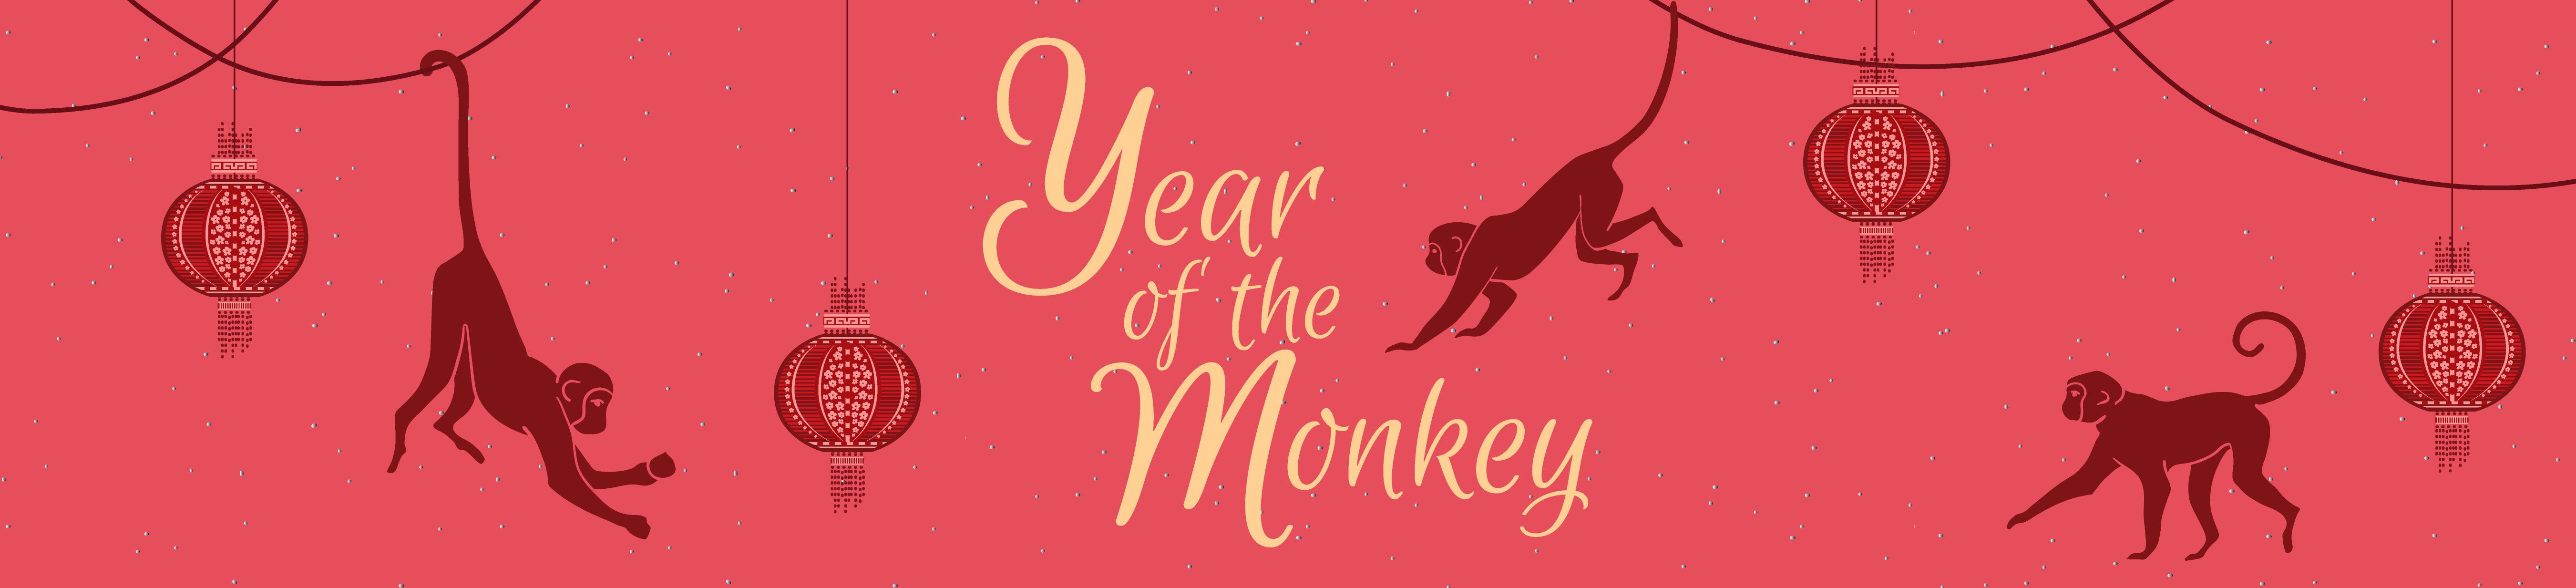 HYear of the Monkey